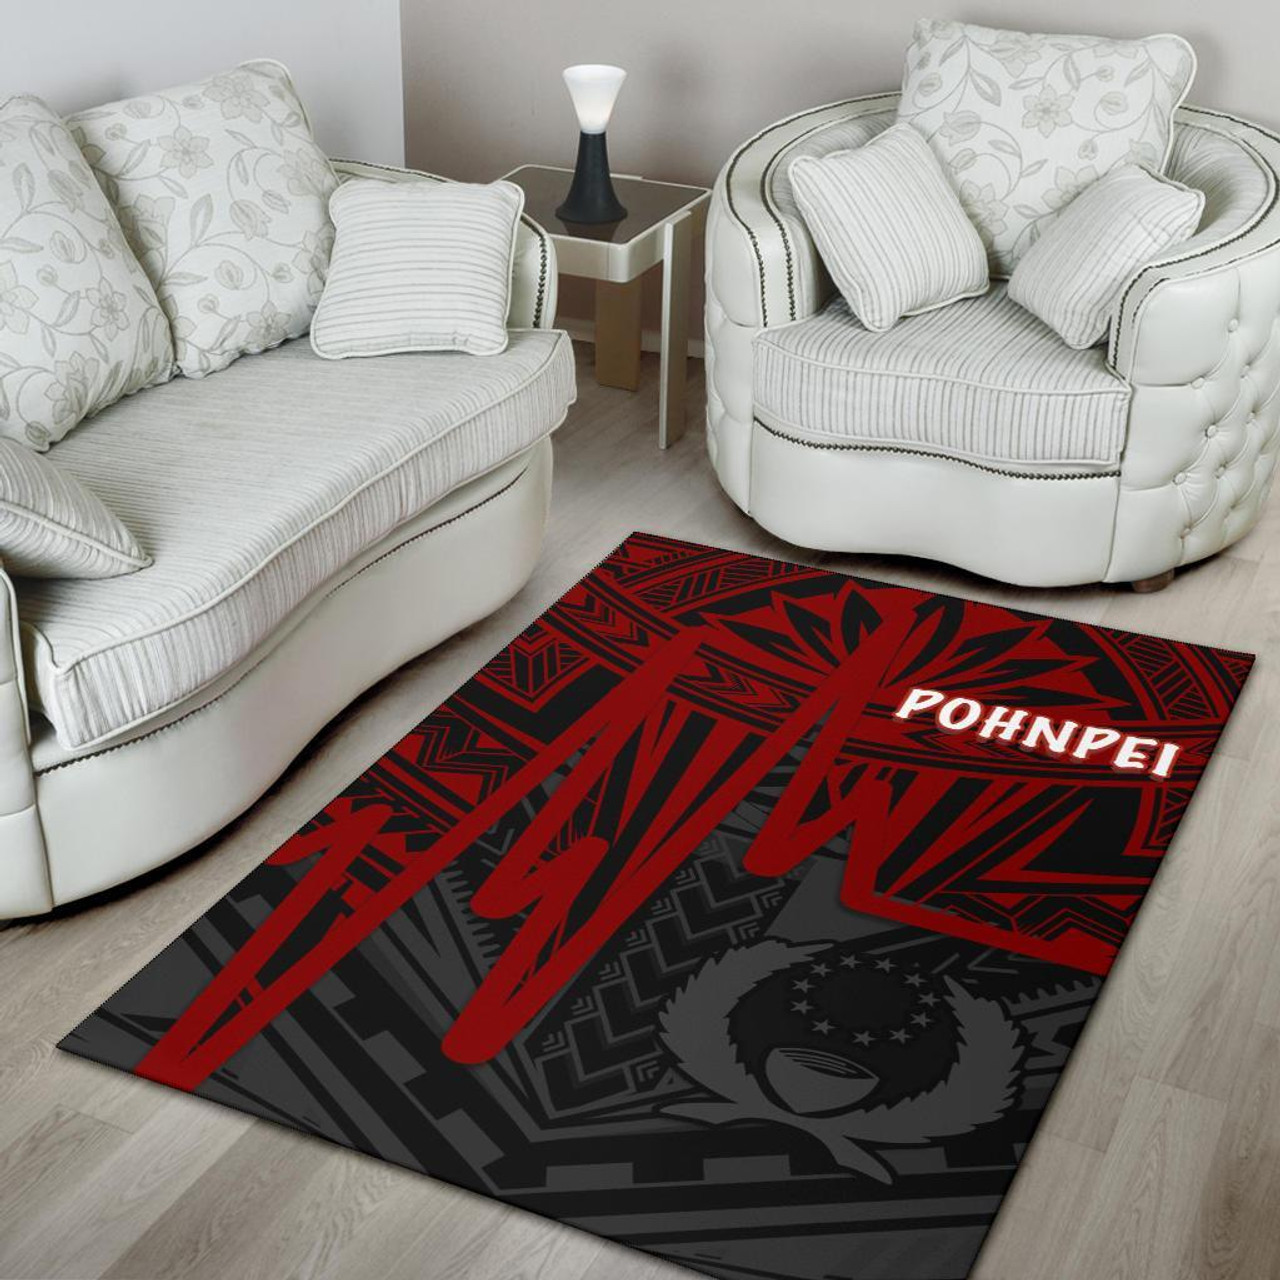 Pohnpei Area Rug - Pohnpei Seal In Heartbeat Patterns Style (Red) Polynesian 4